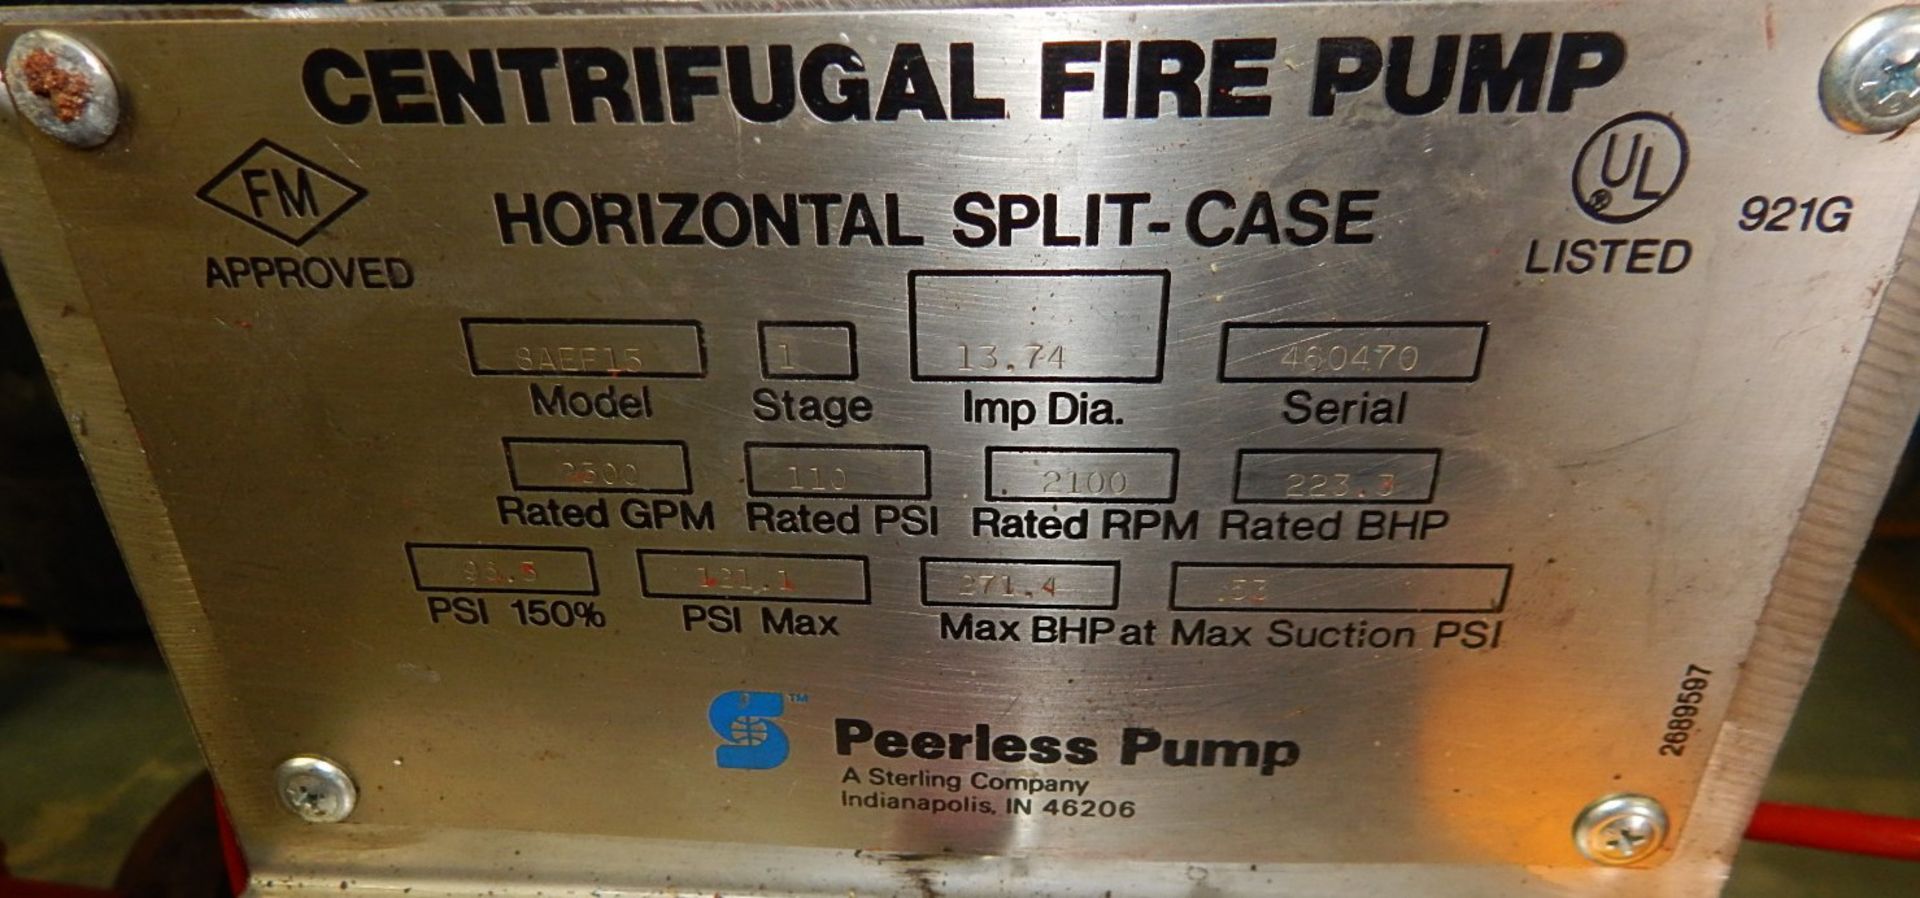 PEERLESS PUMP BAEE15 SKID-MOUNTED CENTRIFUGAL FIRE PUMP WITH 2500 GPM, 121 PSI, 2100 RPM, - Image 6 of 7